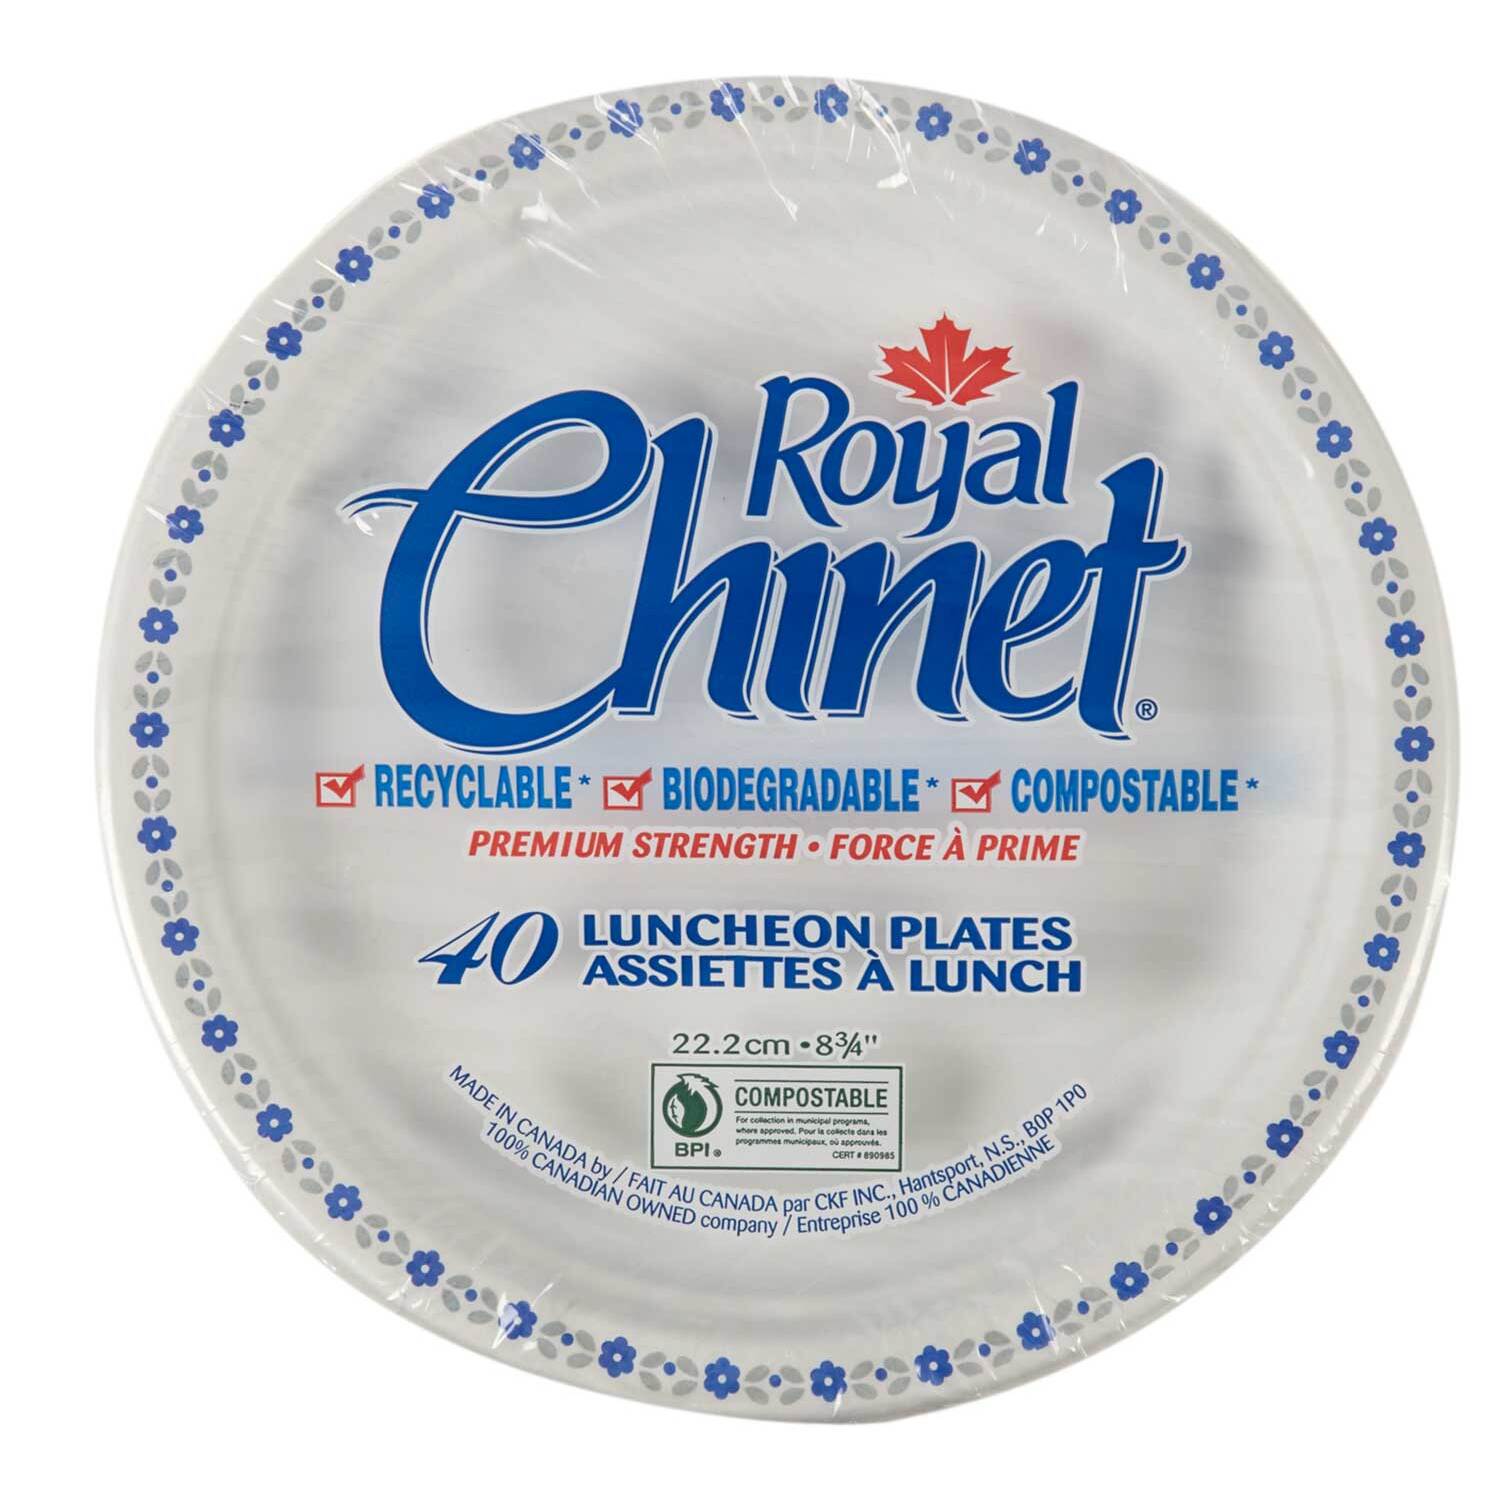 Royal Chinet - Luncheon plates, pk. of 40